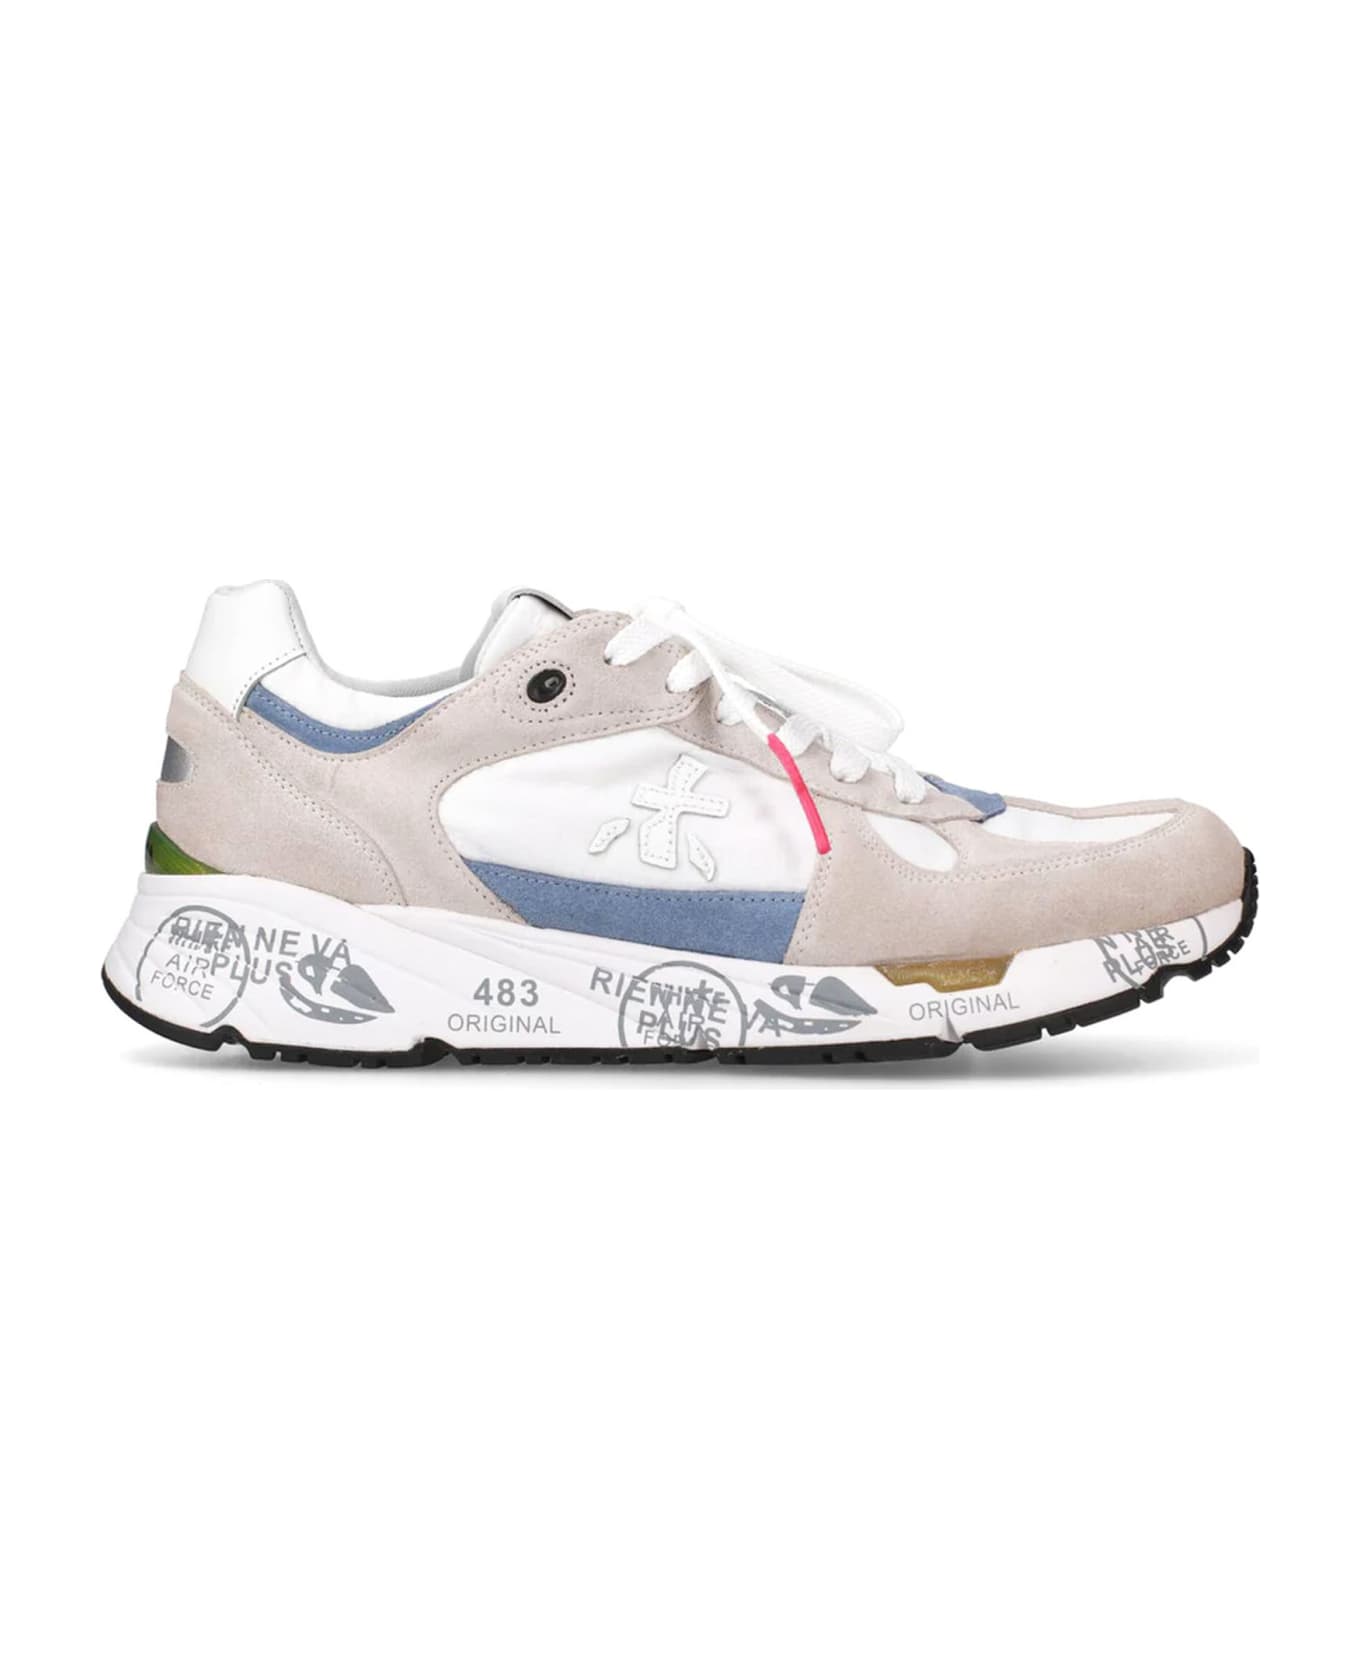 Premiata Mase Sneakers With Contrasting Inserts - Grigio/bianco スニーカー